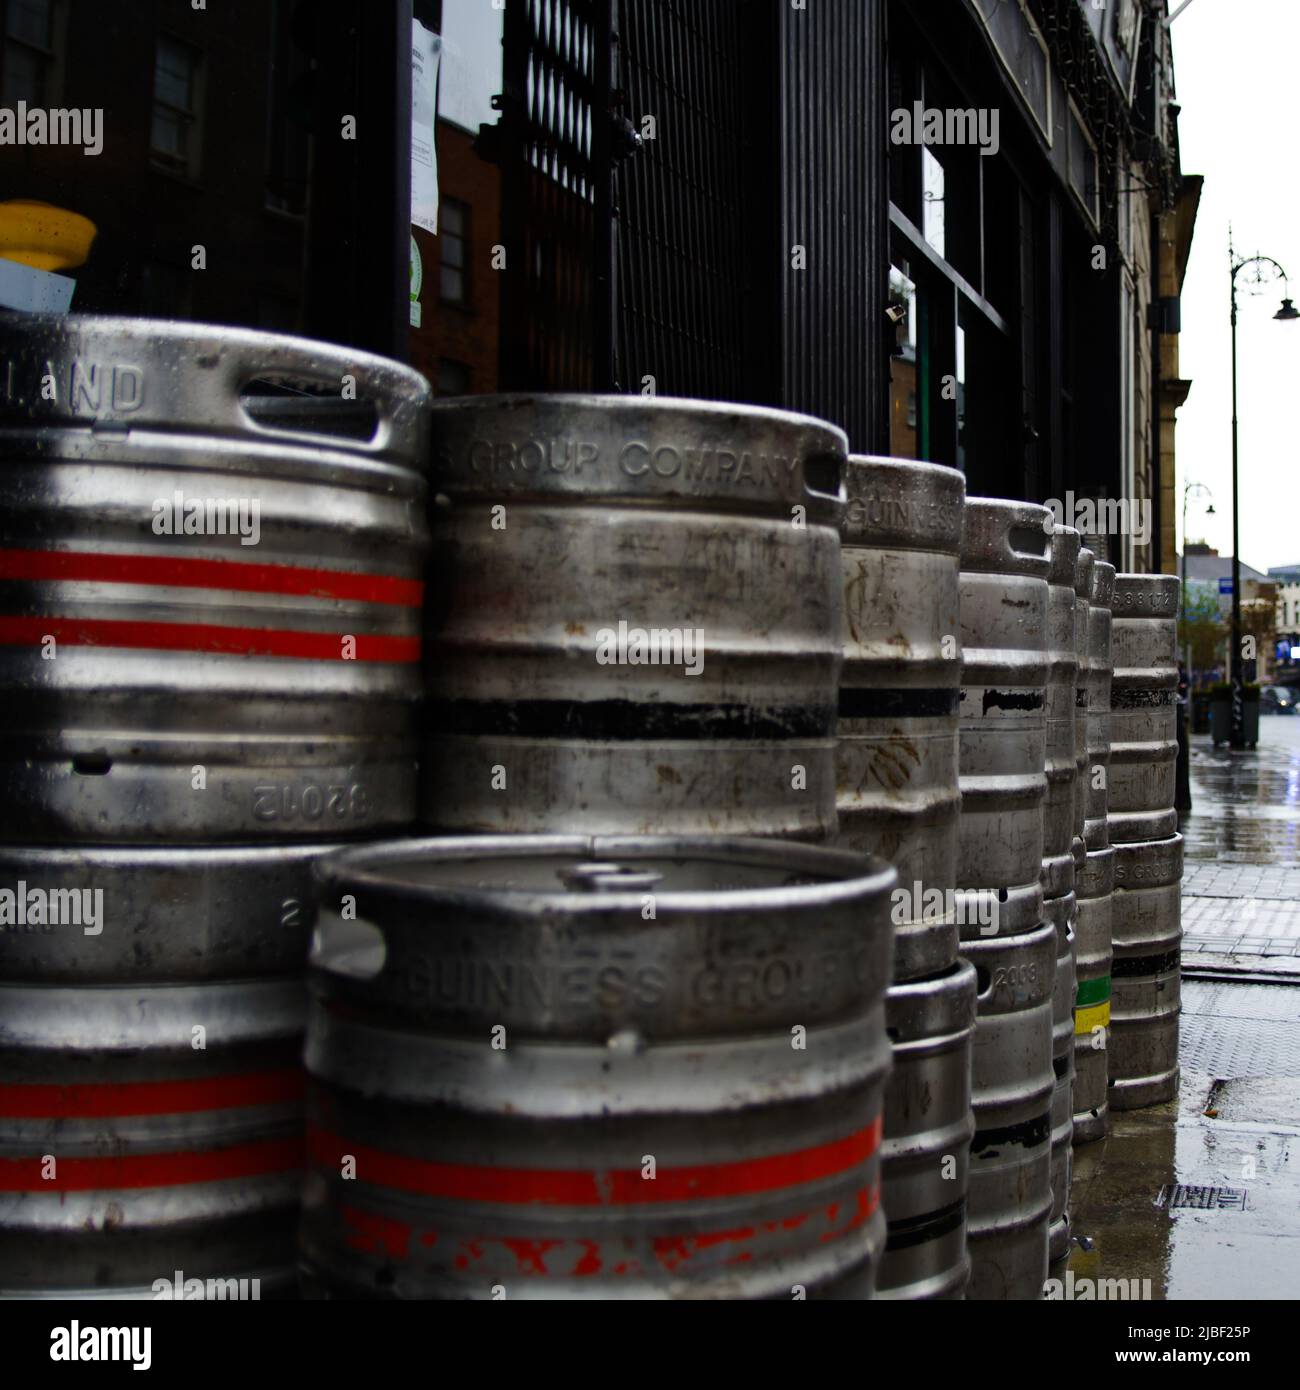 Dublin, Ireland - May 17th 2022: Aluminium beer kegs by Guinness Brewery stacked in front of a pub in Dublin Stock Photo